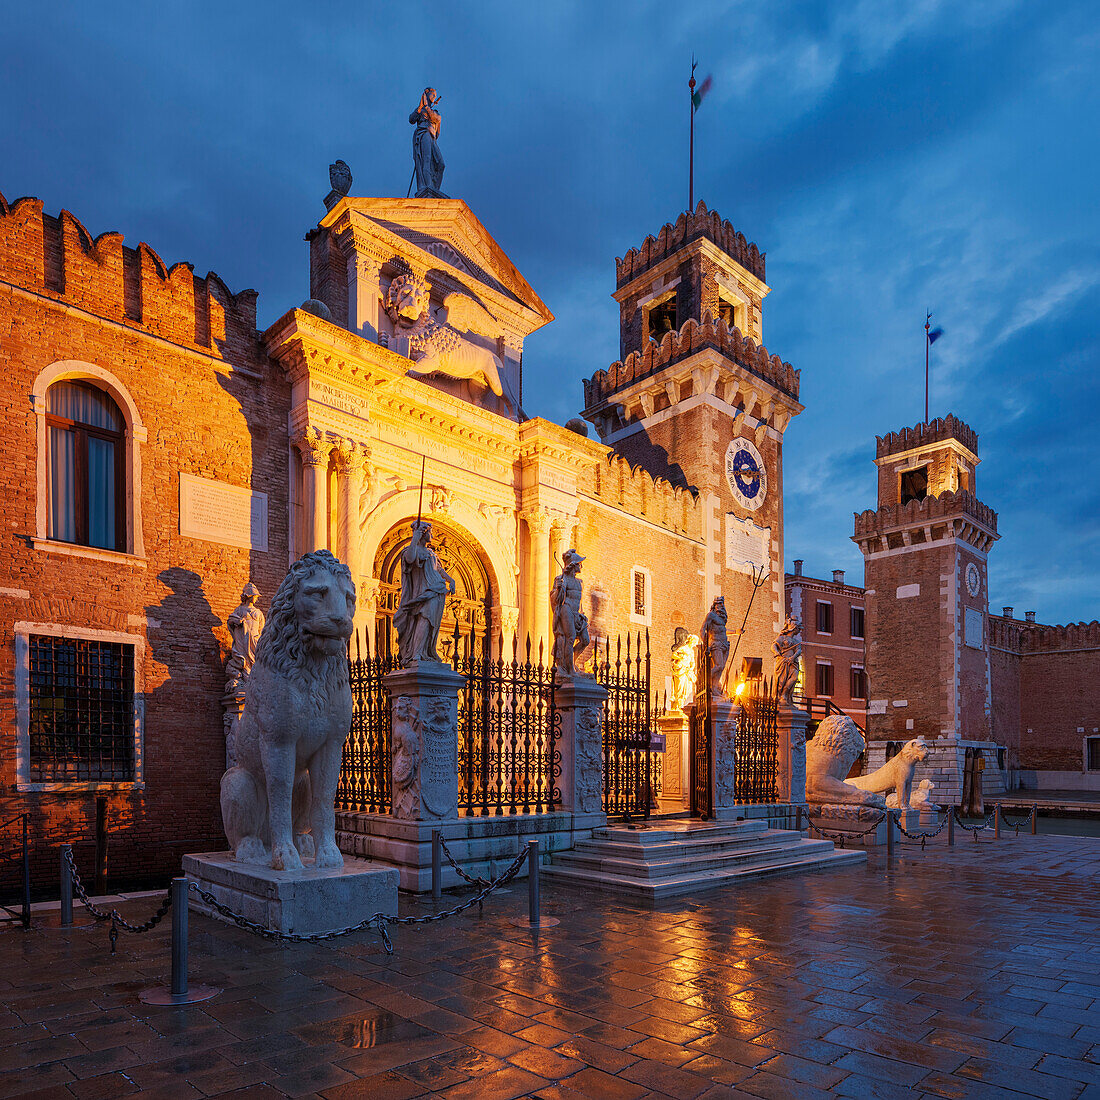 Arsenale di Venezia, the former shipyard and naval base in the blue of the night, with an illuminated wall and portal Ingresso di Terra left and Ingresso All'Acqua at the right, Venetian Arsenal, Castello, Venice, Veneto, Italy